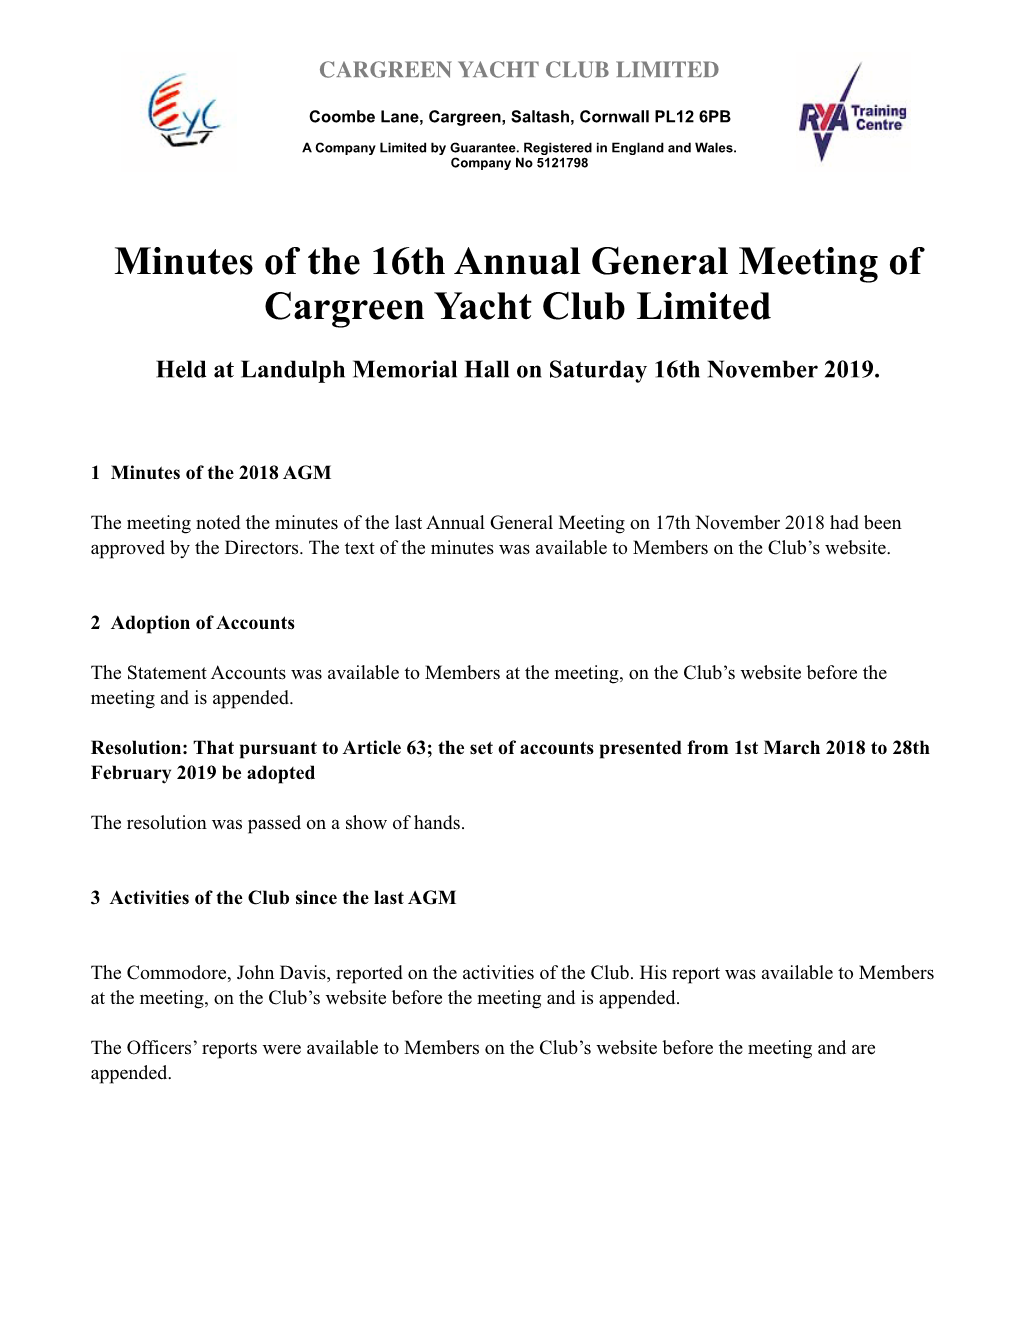 Minutes of the 16Th Annual General Meeting of Cargreen Yacht Club Limited